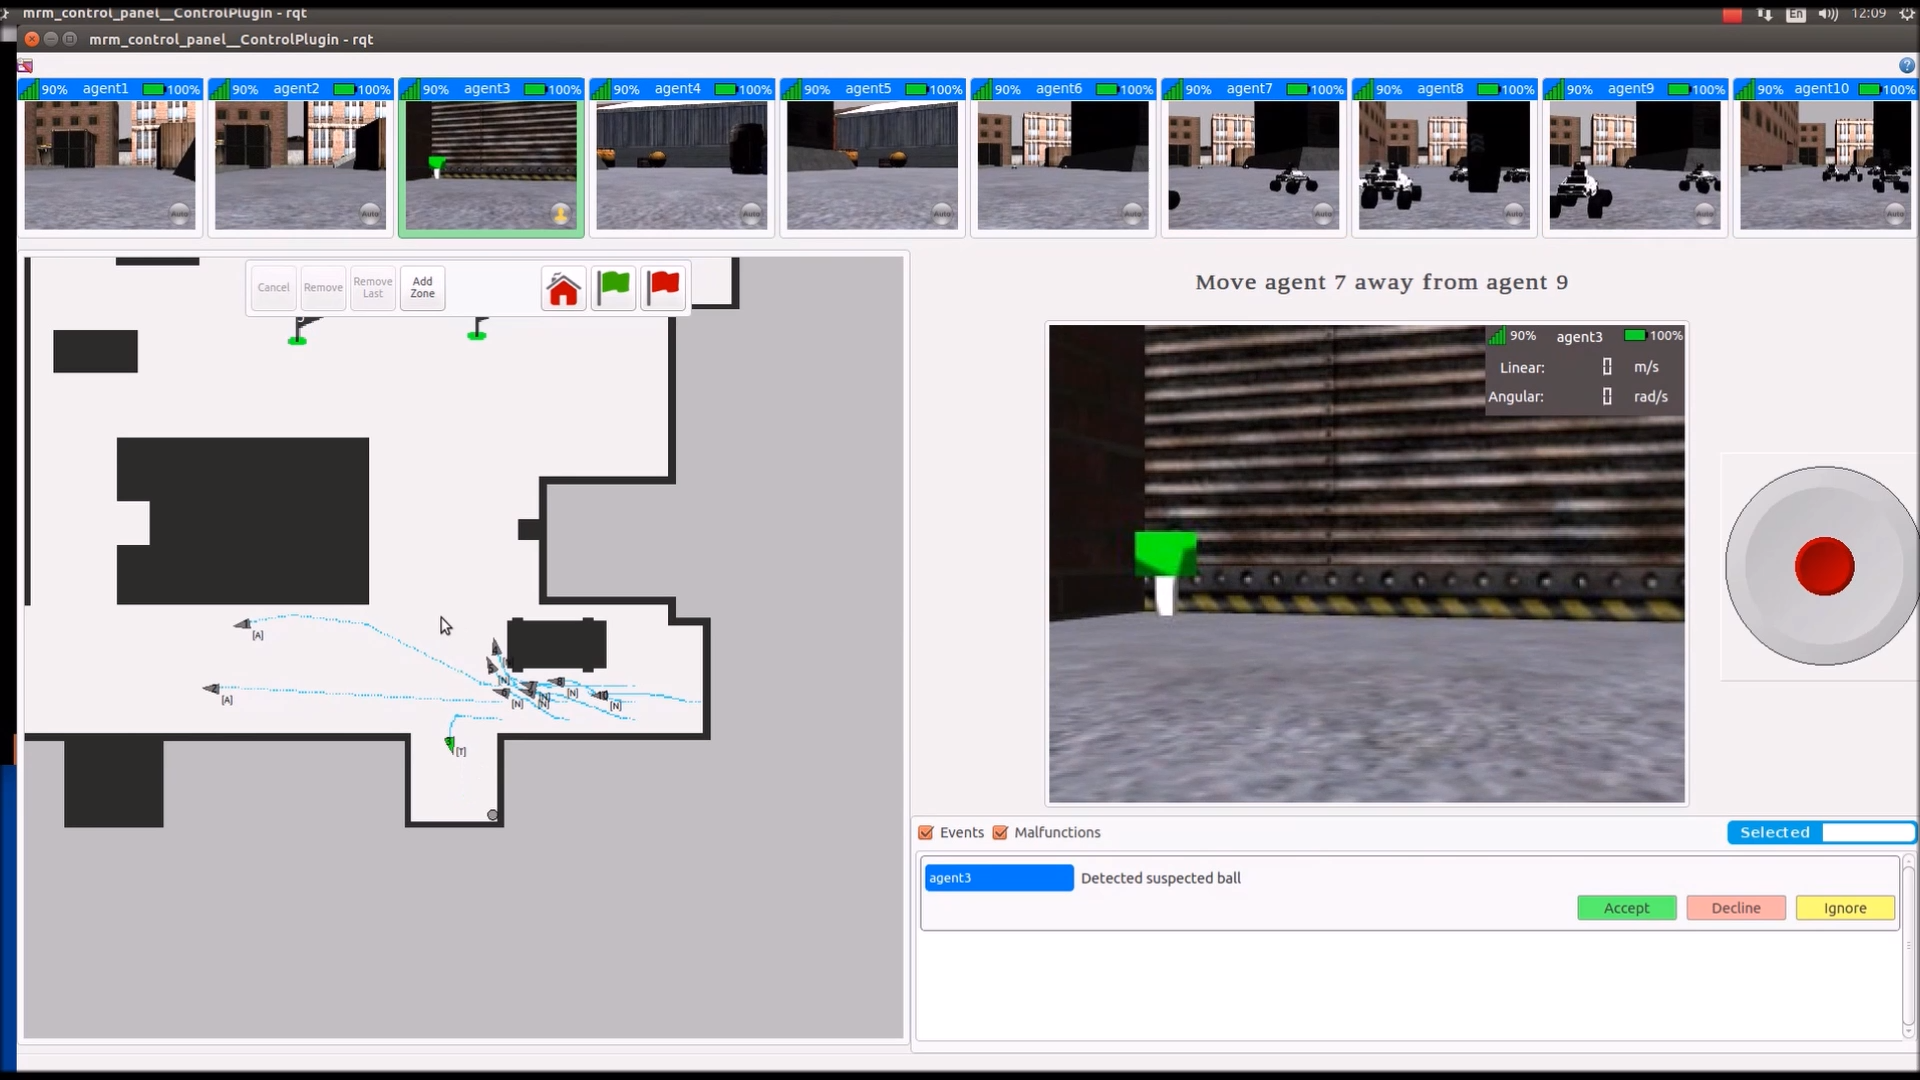 Screenshot of video feed and map view for 10 robots
